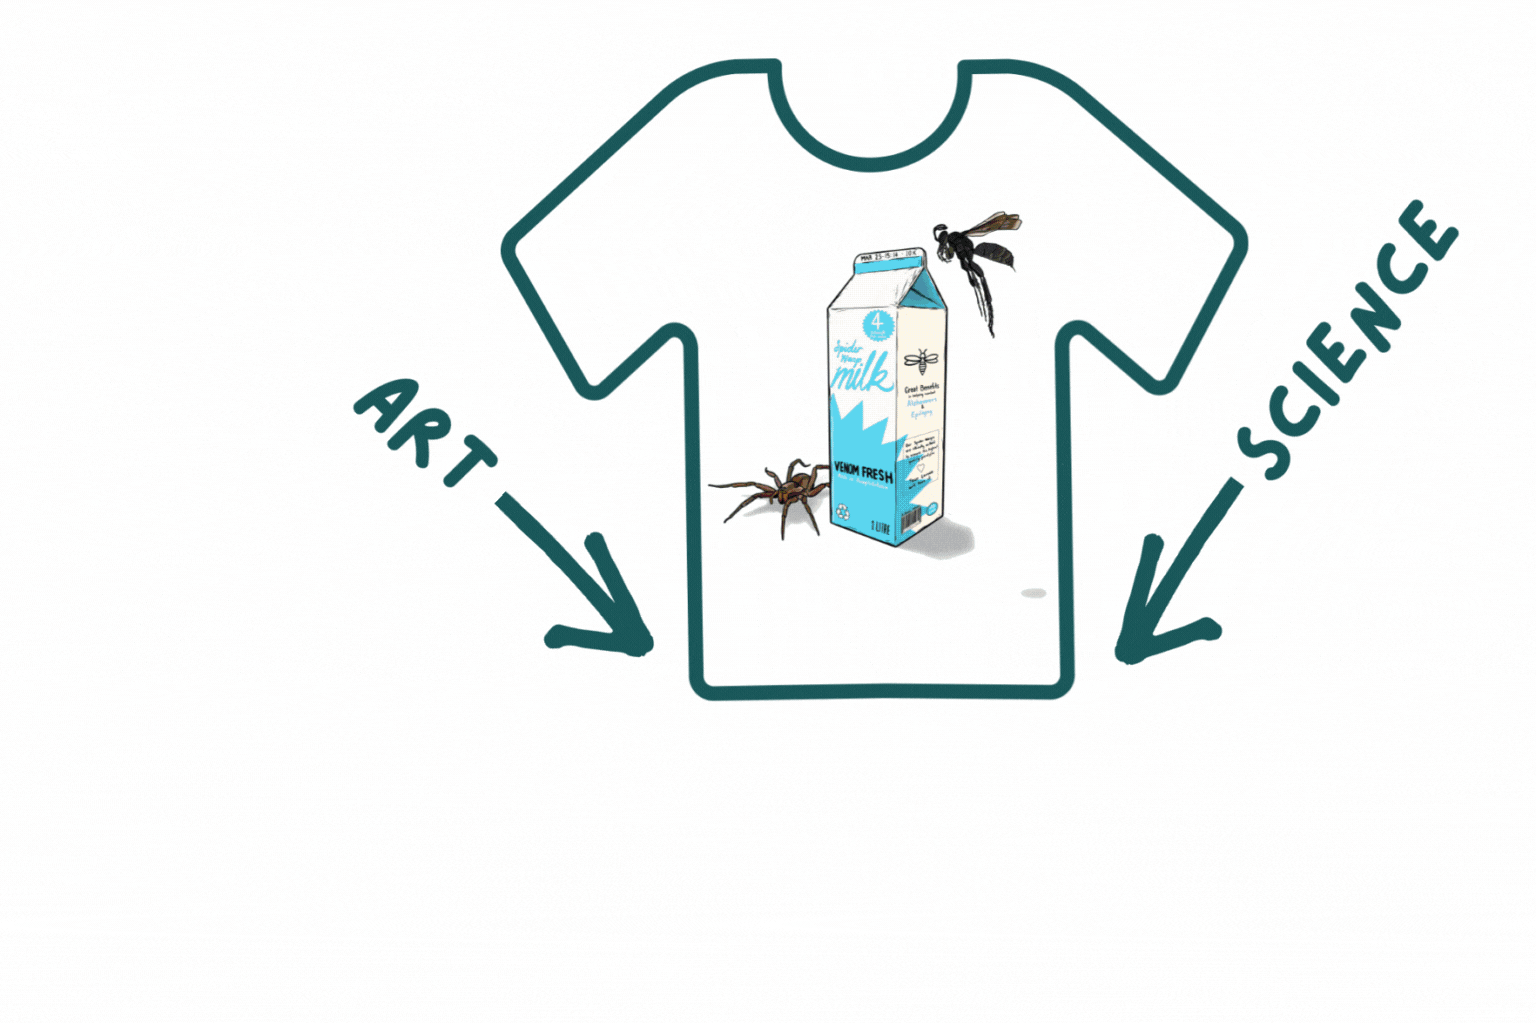 Arrows labeled art and science pointing to a shirt with images of science on it.